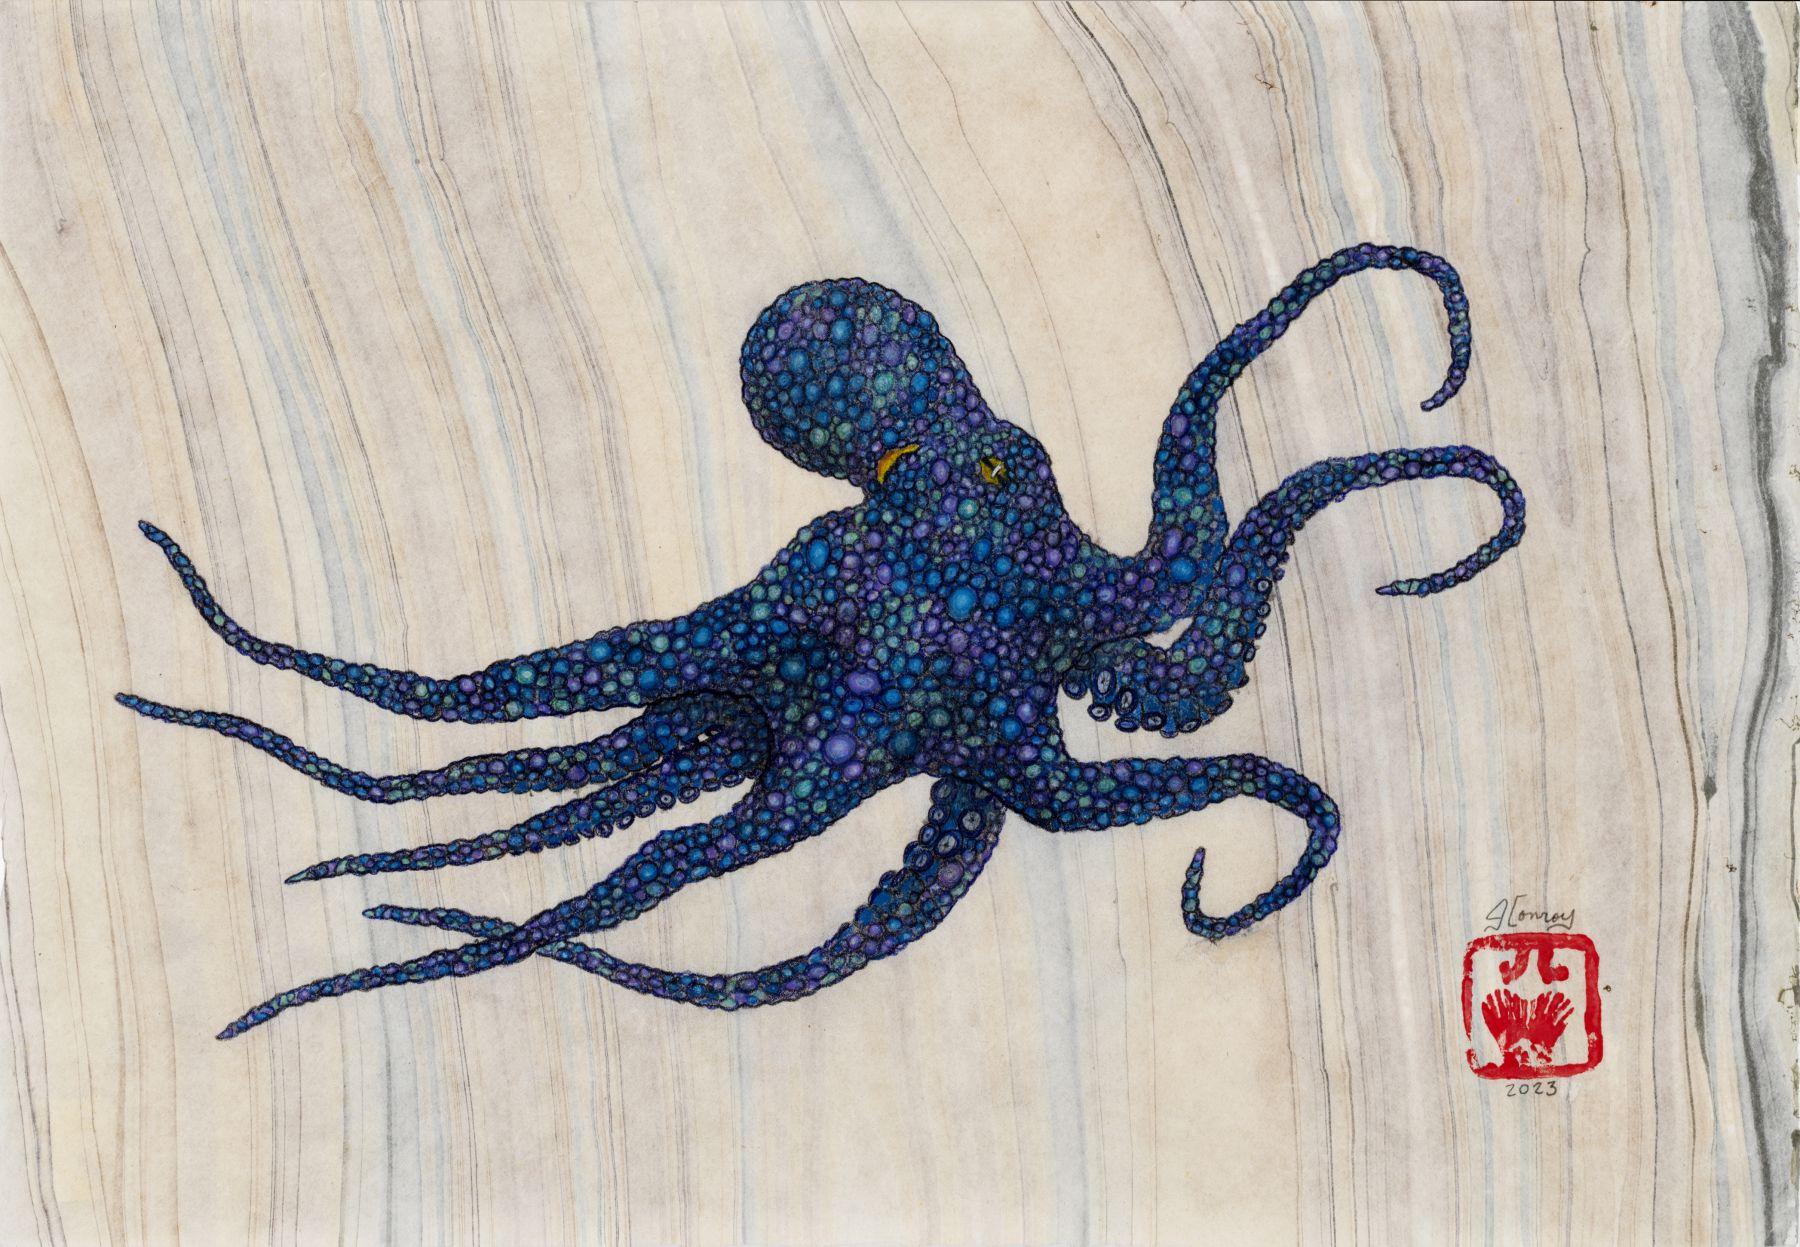 Jeff Conroy Animal Art - Boo Berry - Gyotaku Style Sumi Ink Painting of a Multi-Colored Octopus 